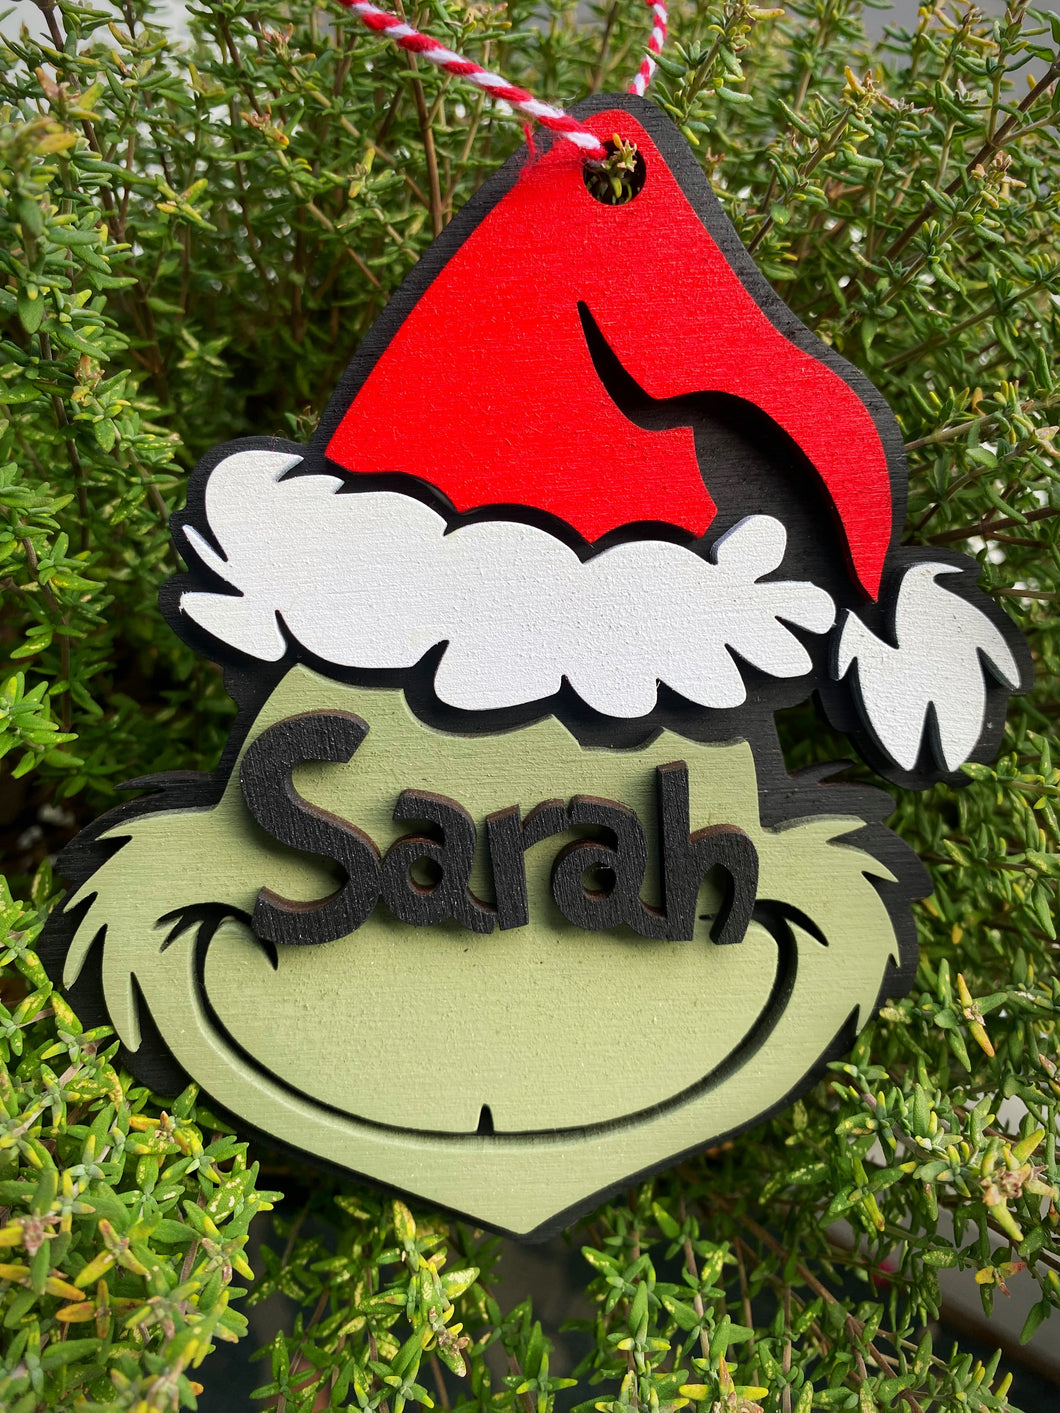 Personalized Grinch Ornaments